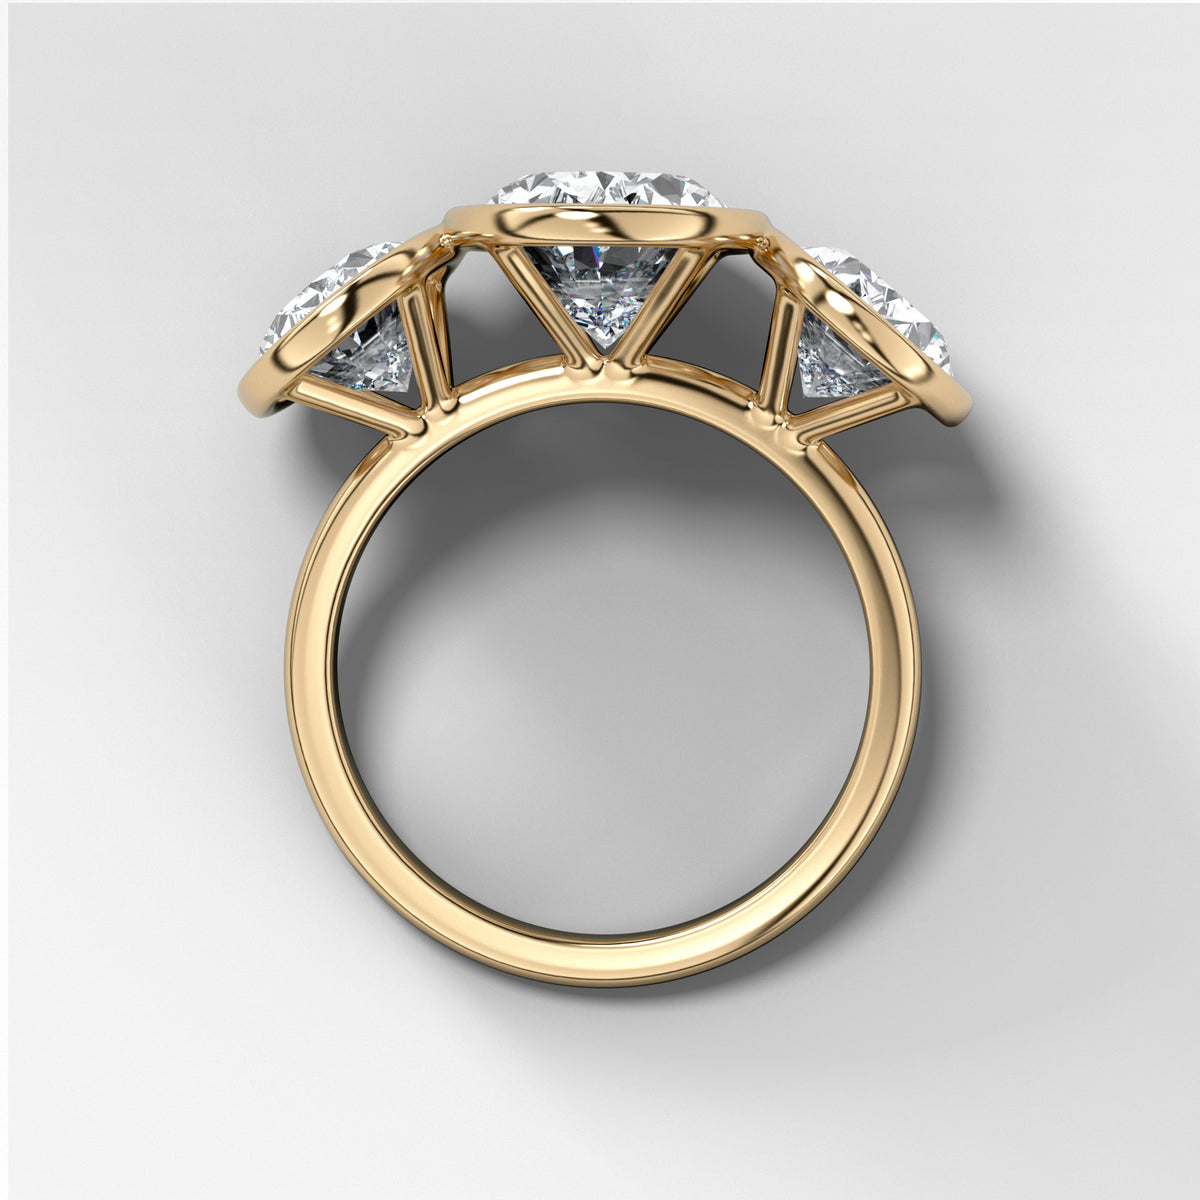 Penumbra Bezel Triad Engagement Ring With Oval Cut Diamonds